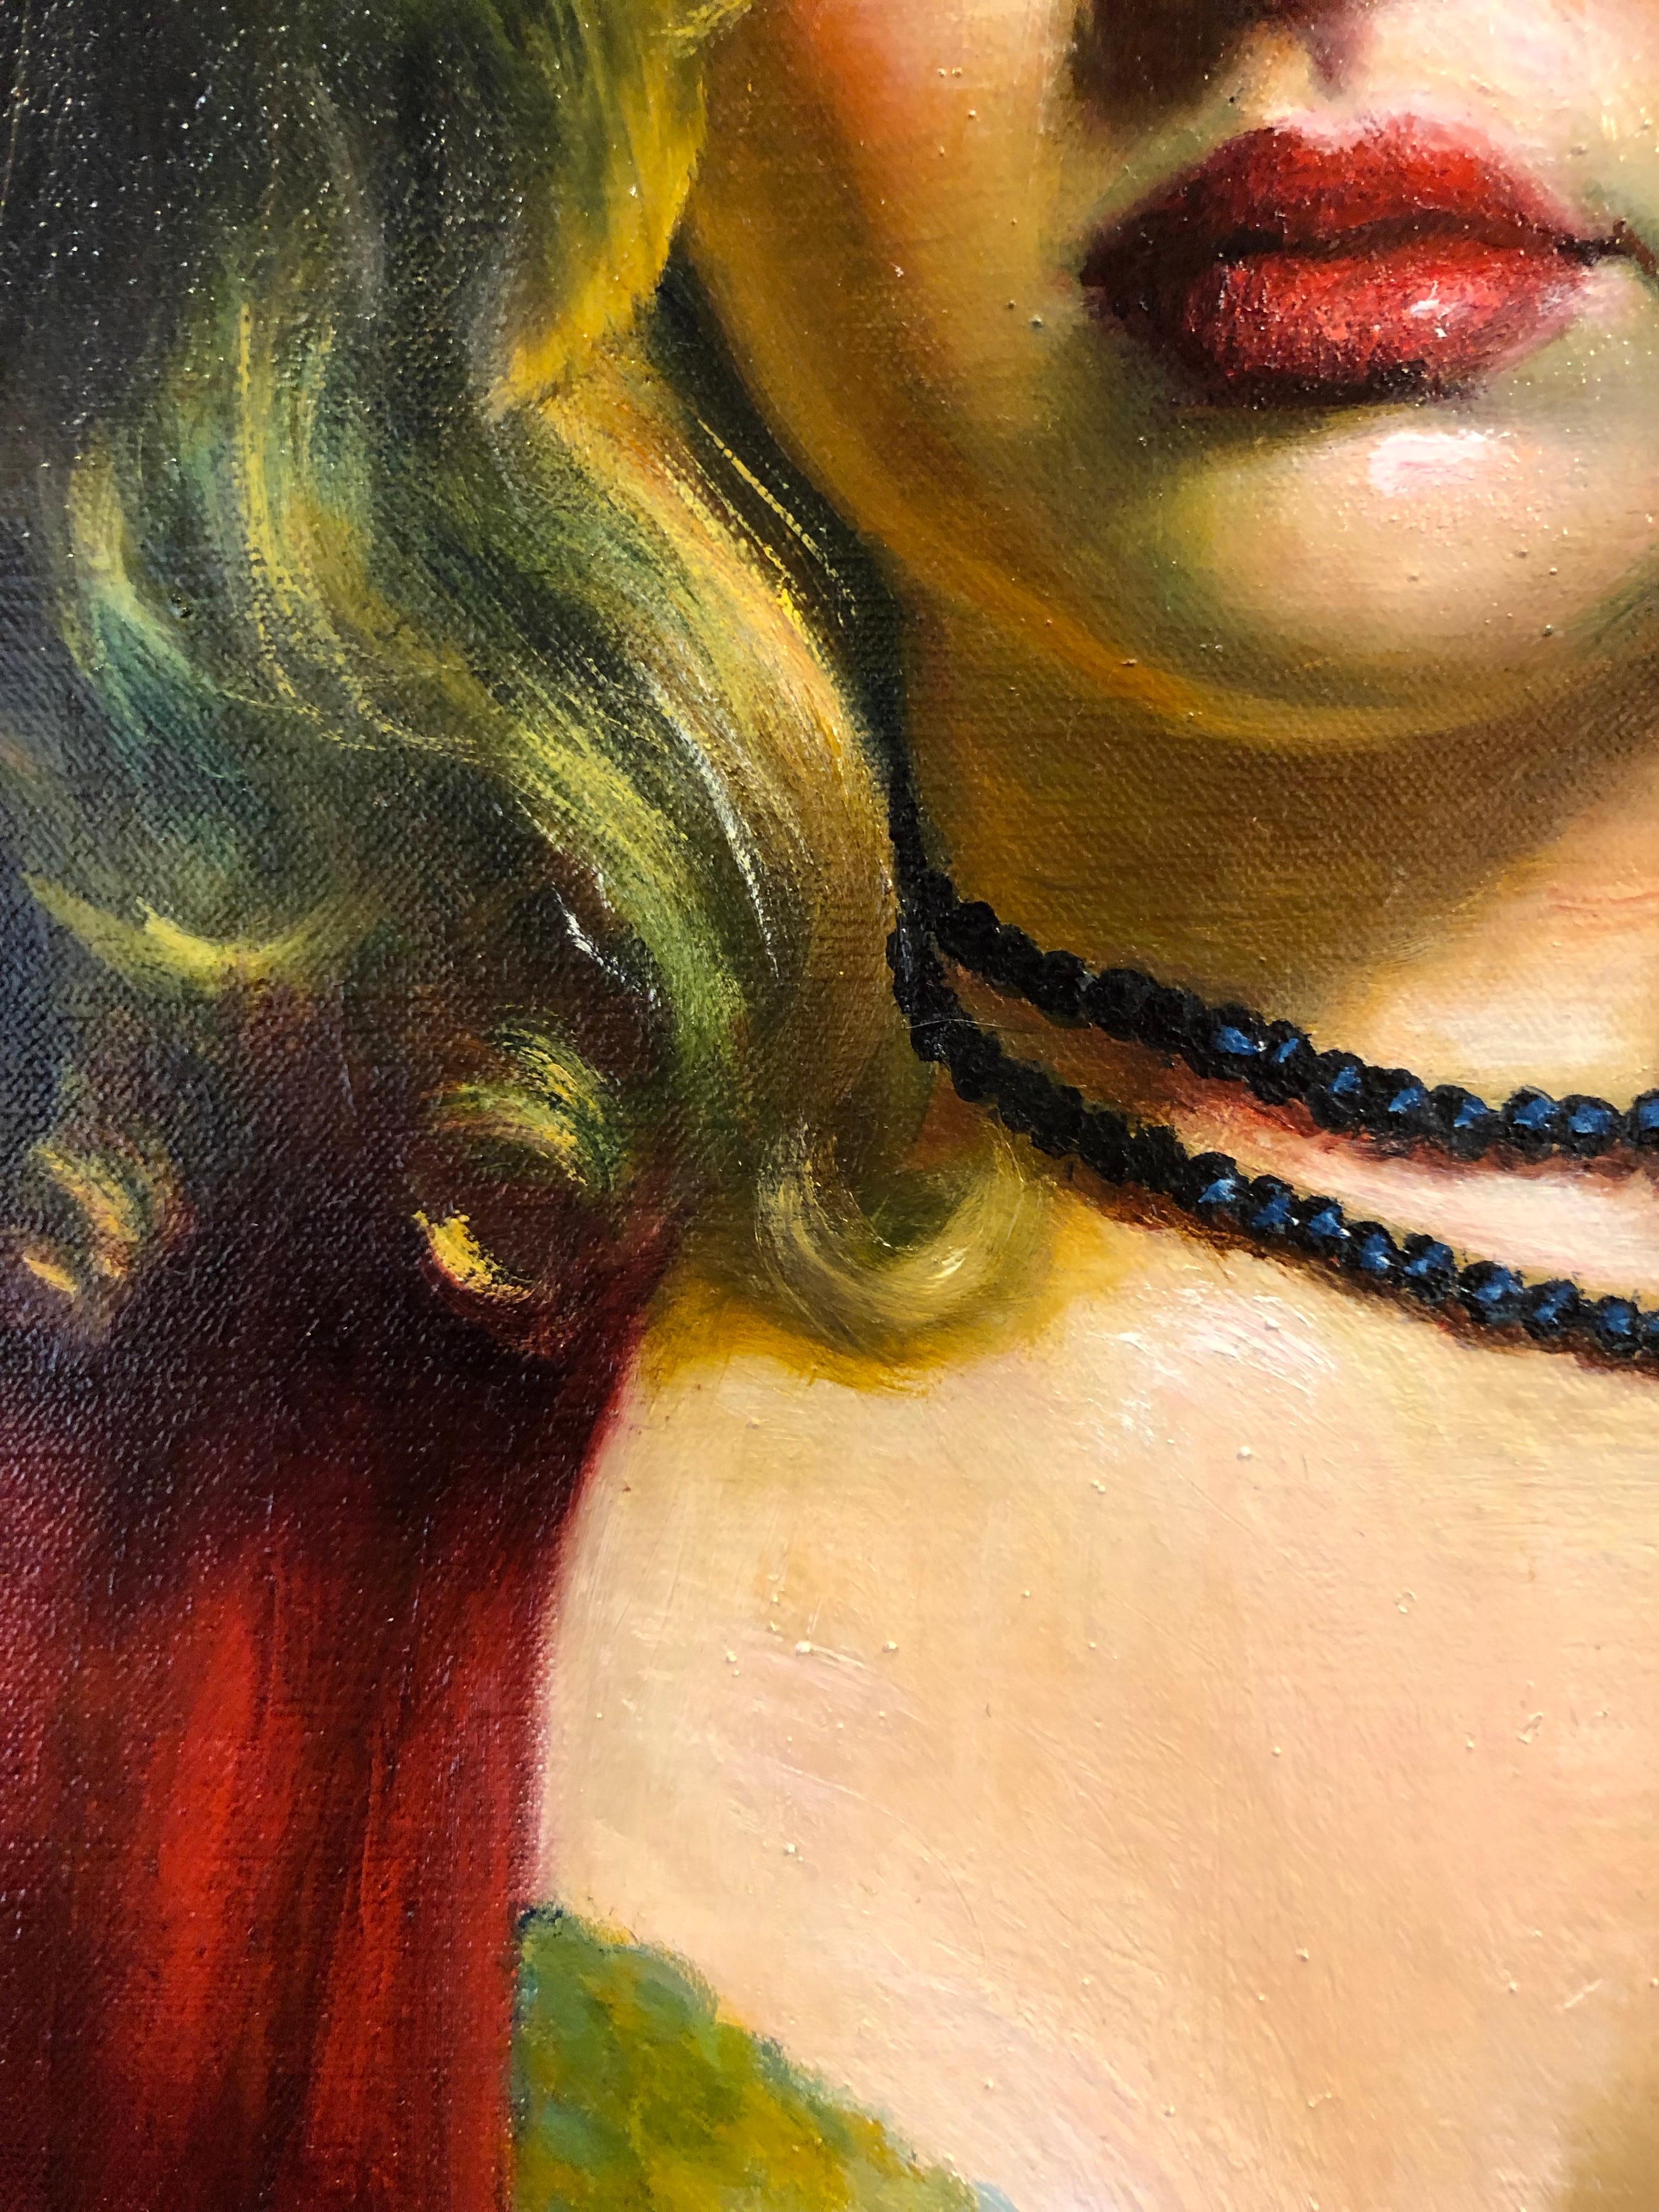 Jessica stares directly out from the painting with a defiant and confident stare.  Her loose fitting red robe is open revealing her gold and black negligee.  Her loose hair and golden curls fall around her neck and highlight the string of black